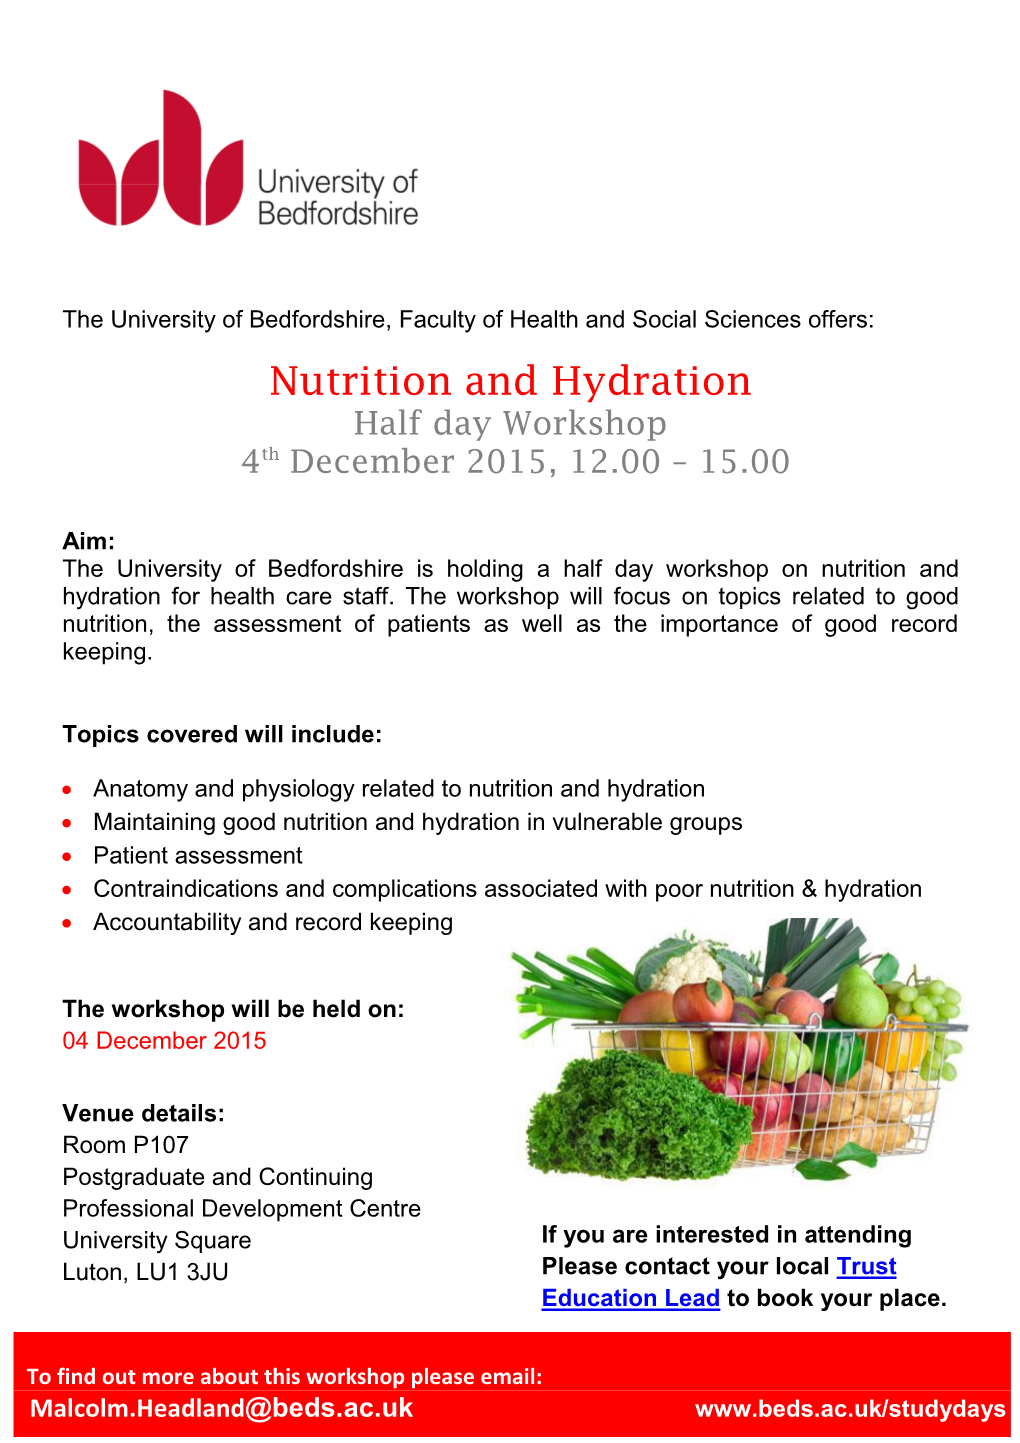 Nutrition and Hydration Half Day Workshop 4Th December 2015, 12.00 – 15.00